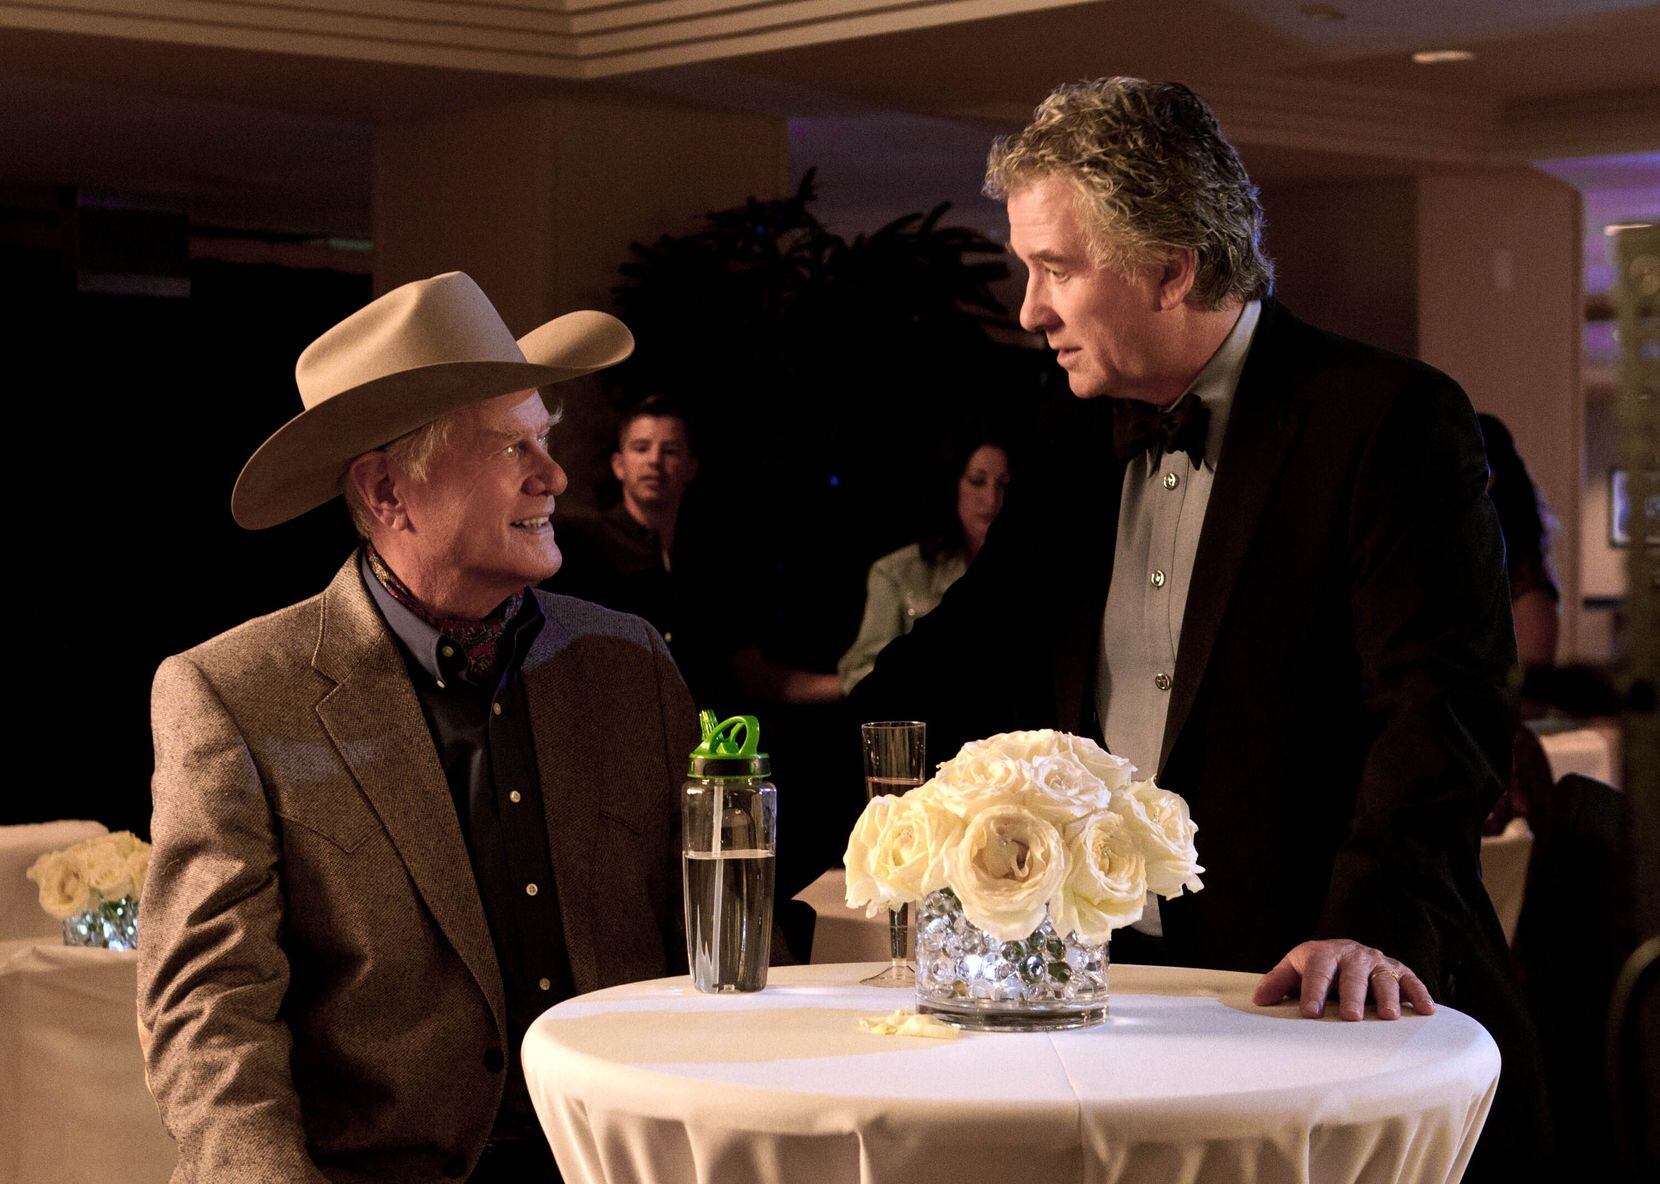 Larry Hagman as J.R. Ewing and Patrick Duffy as Bobby Ewing in a scene from "Dallas."
